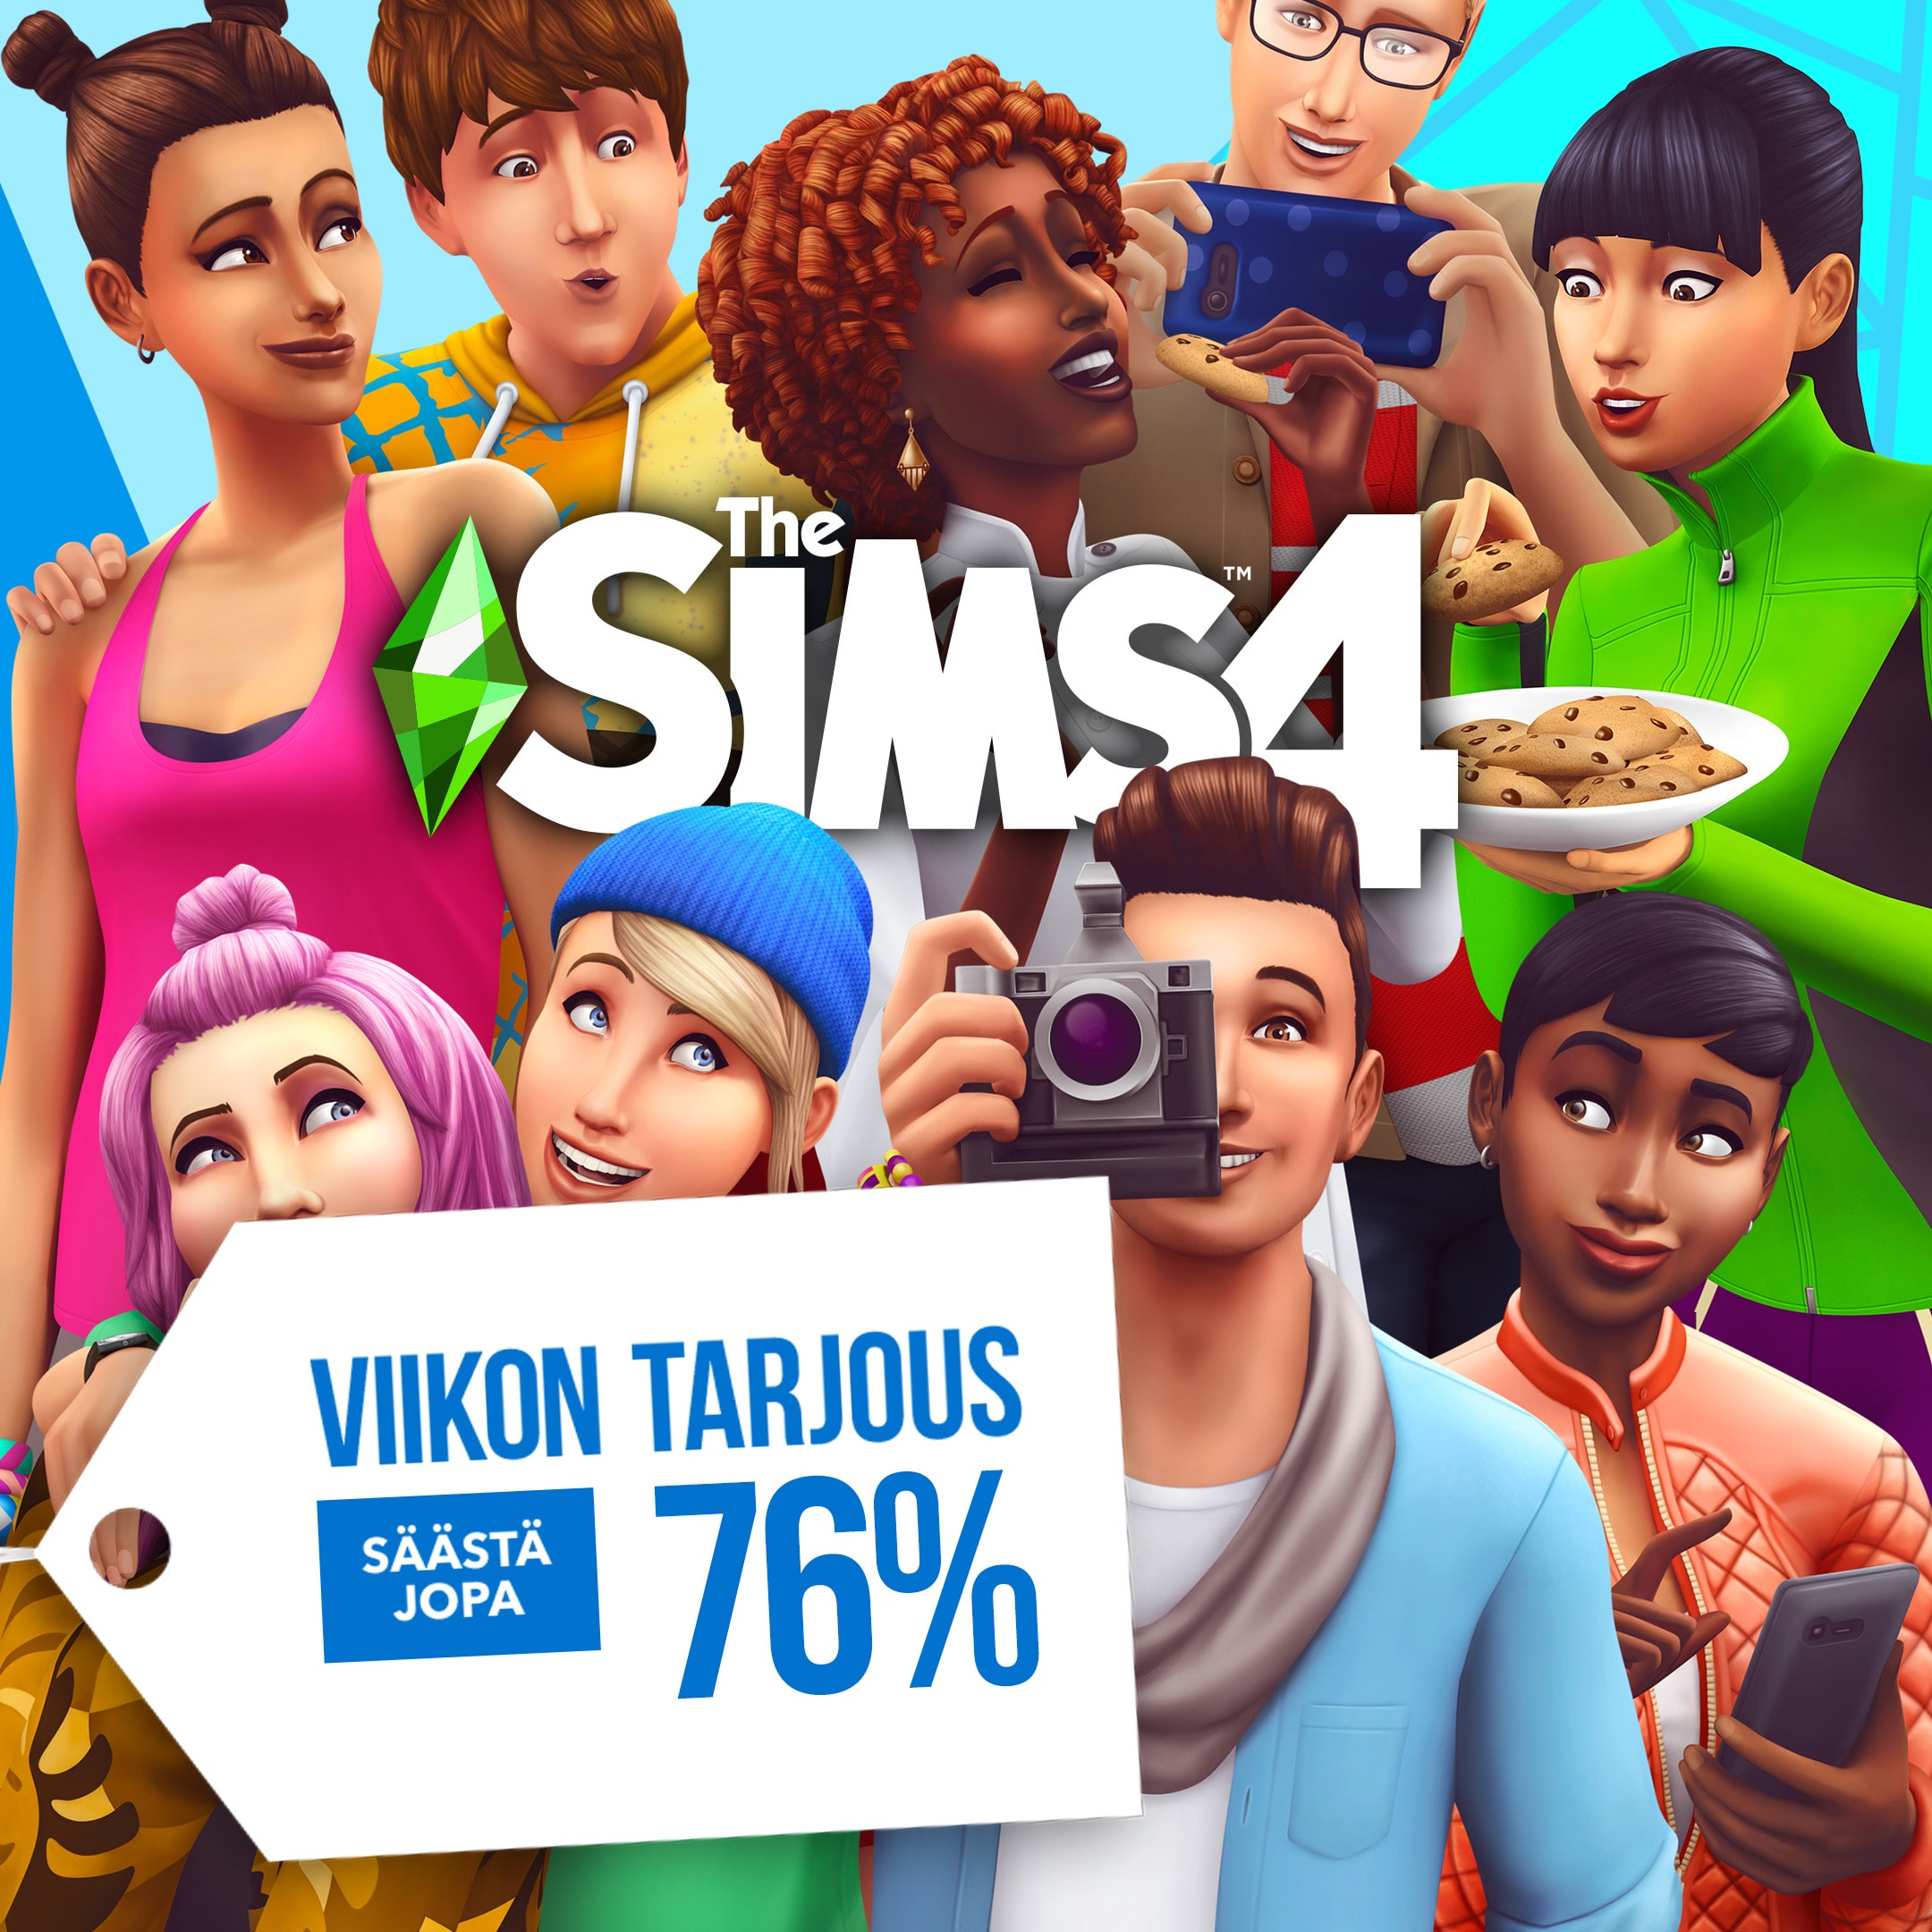 [PROMO] Deal of the Week - Sims 4